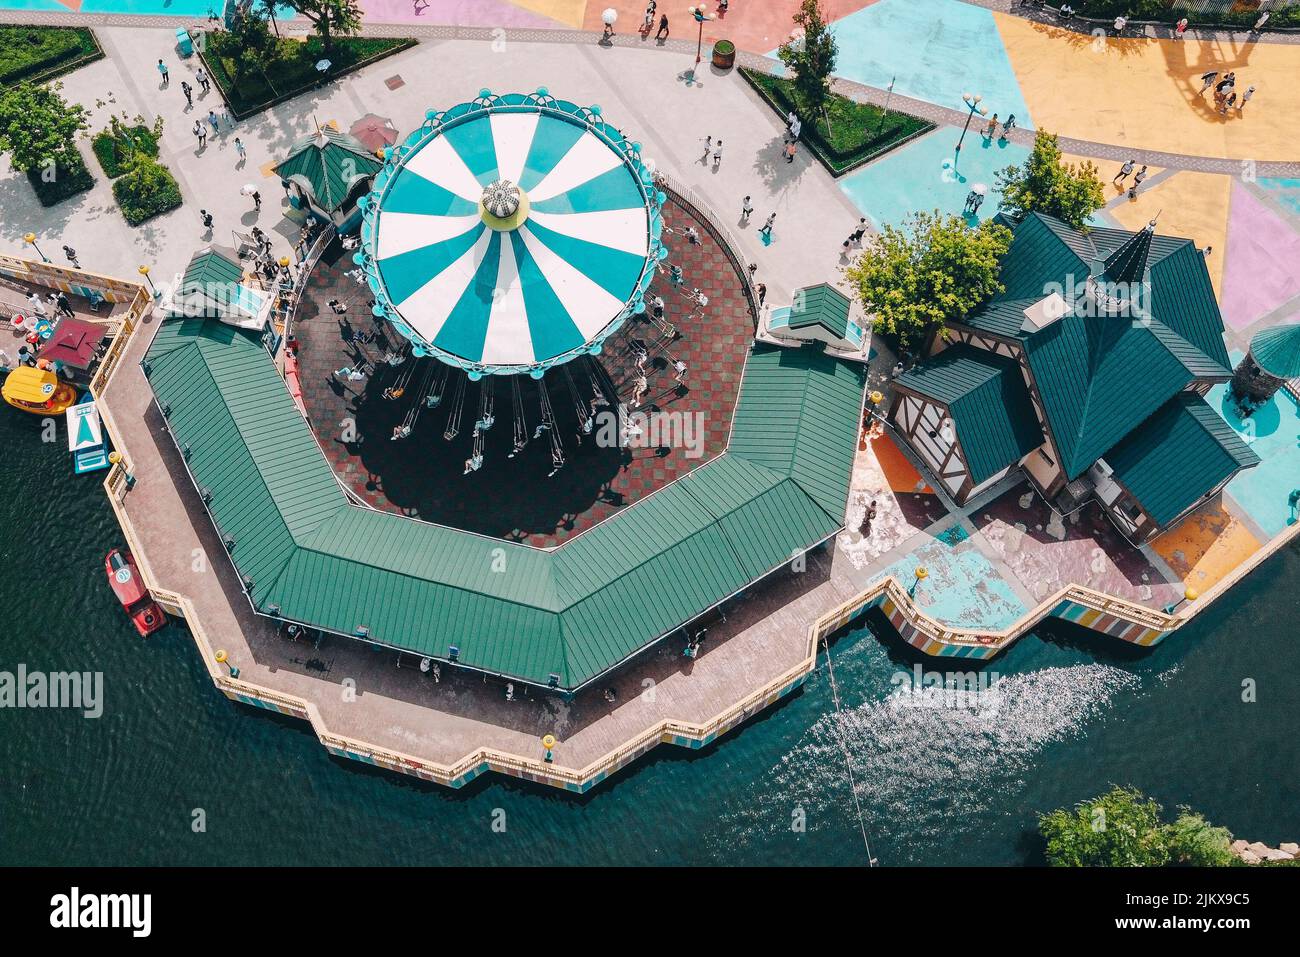 An aerial view of a roof of an attraction in a park Stock Photo